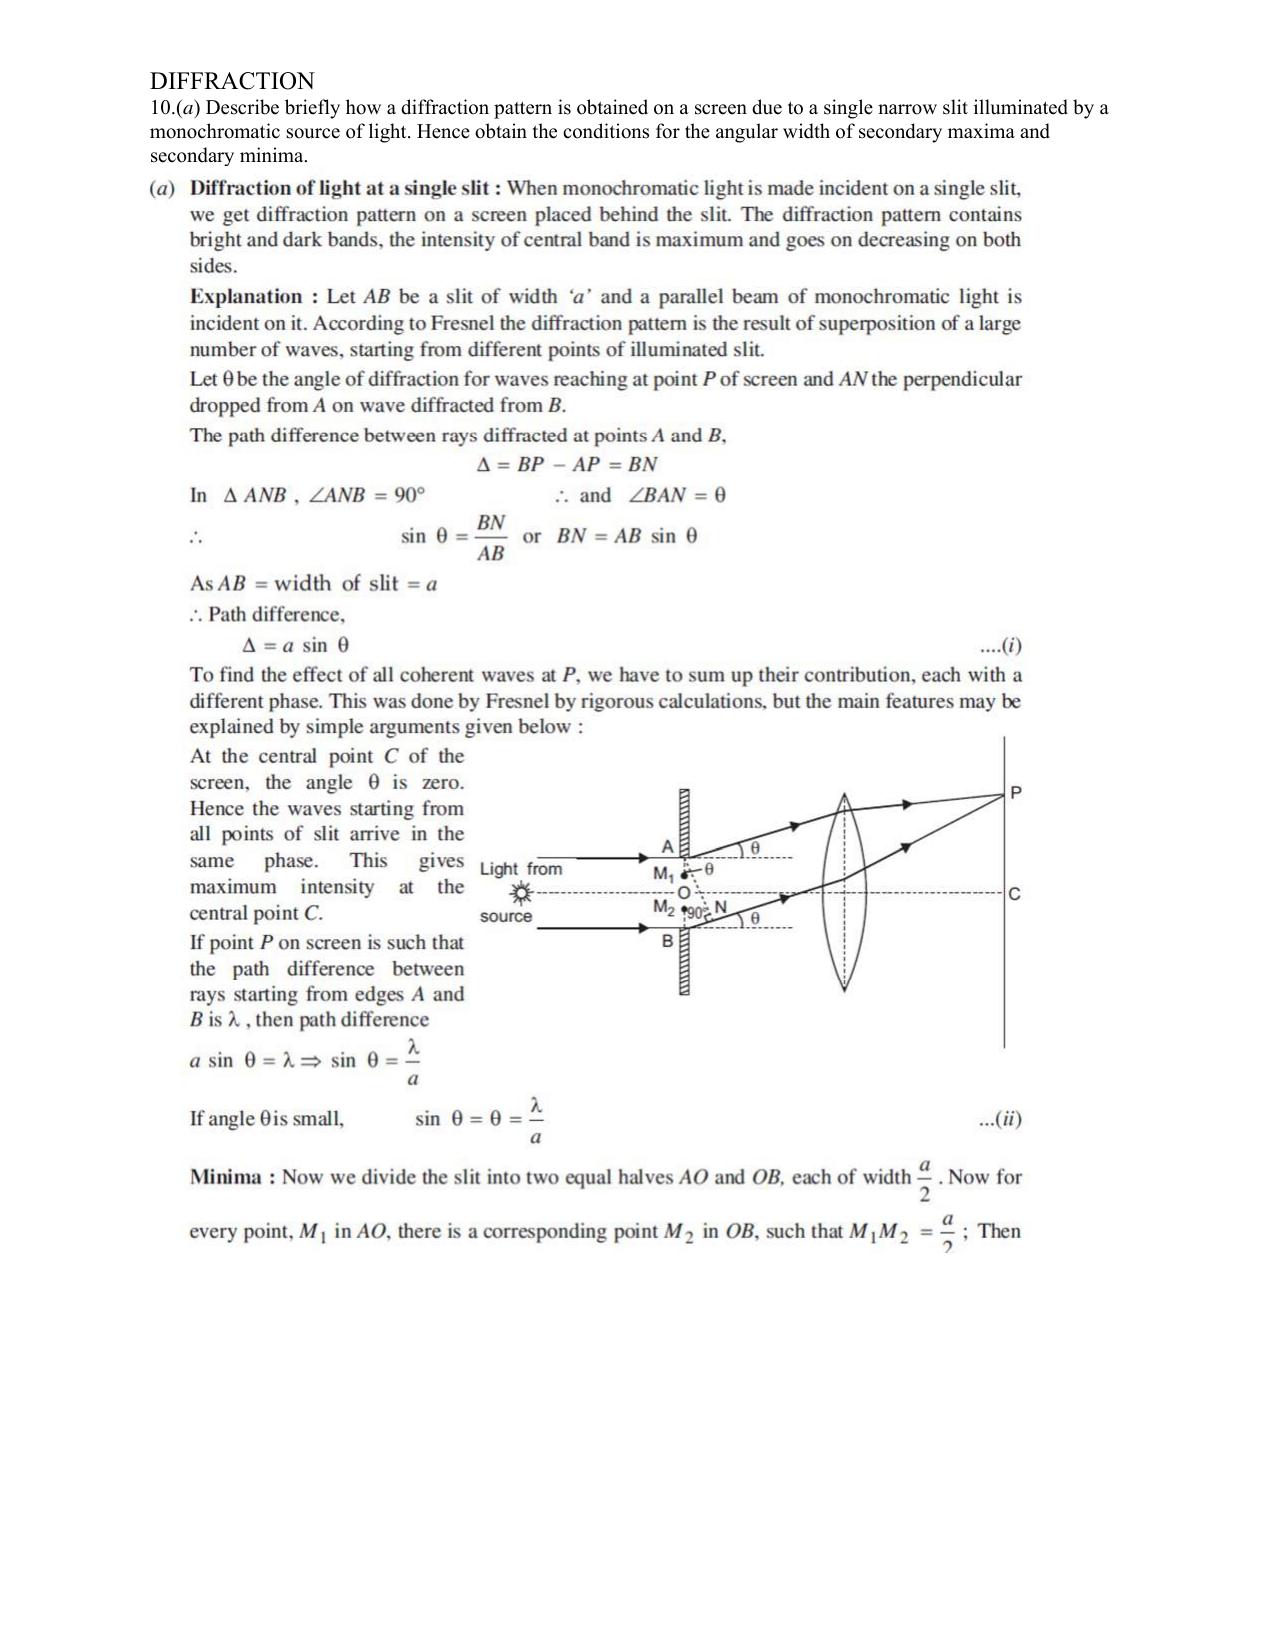 CBSE Class 12 Physics Worksheets for Optics - Page 18